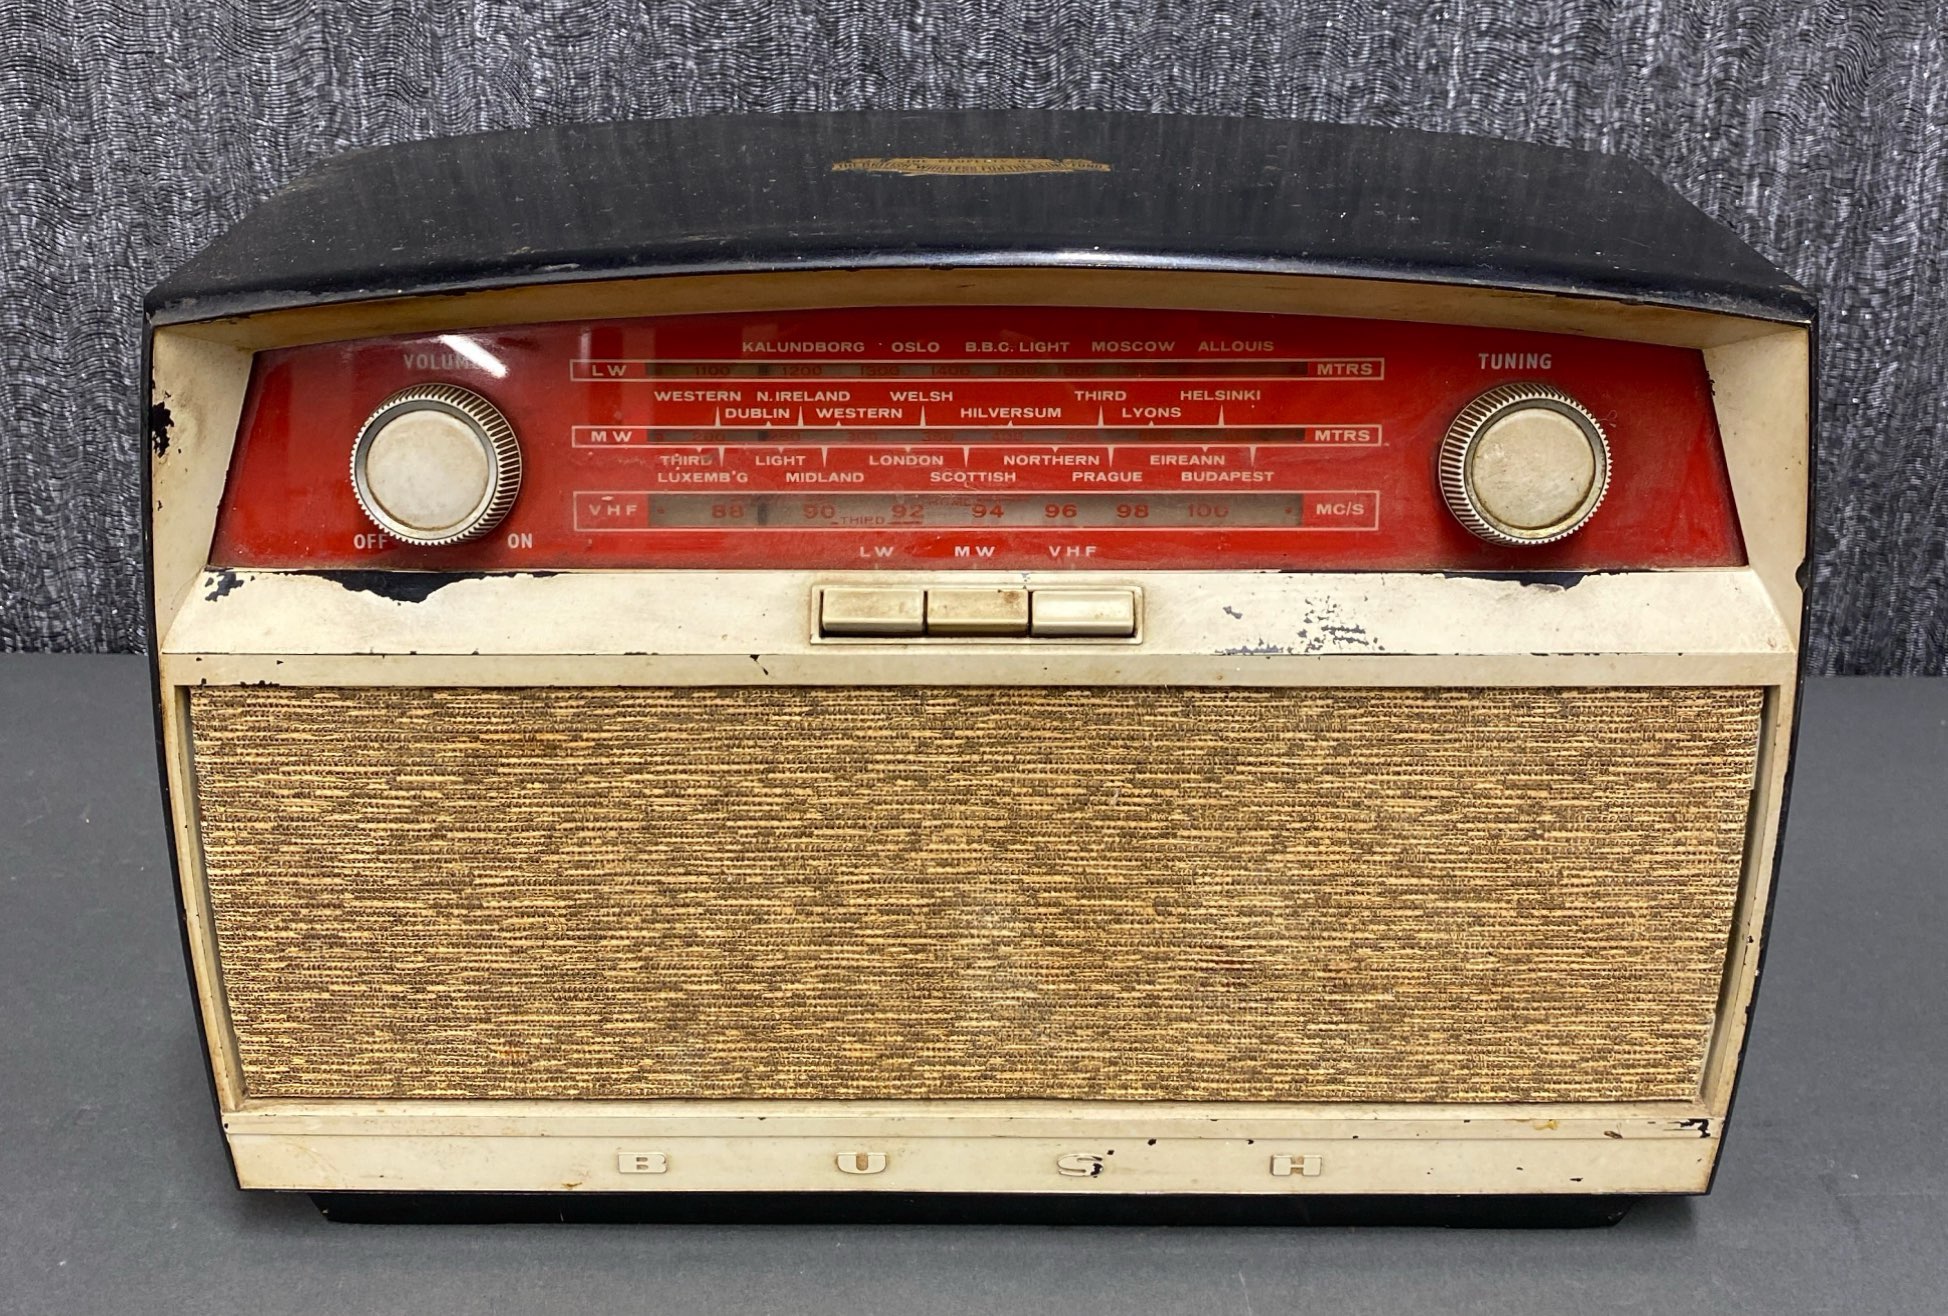 An early Bush transistor radio, serial number 449 22728.